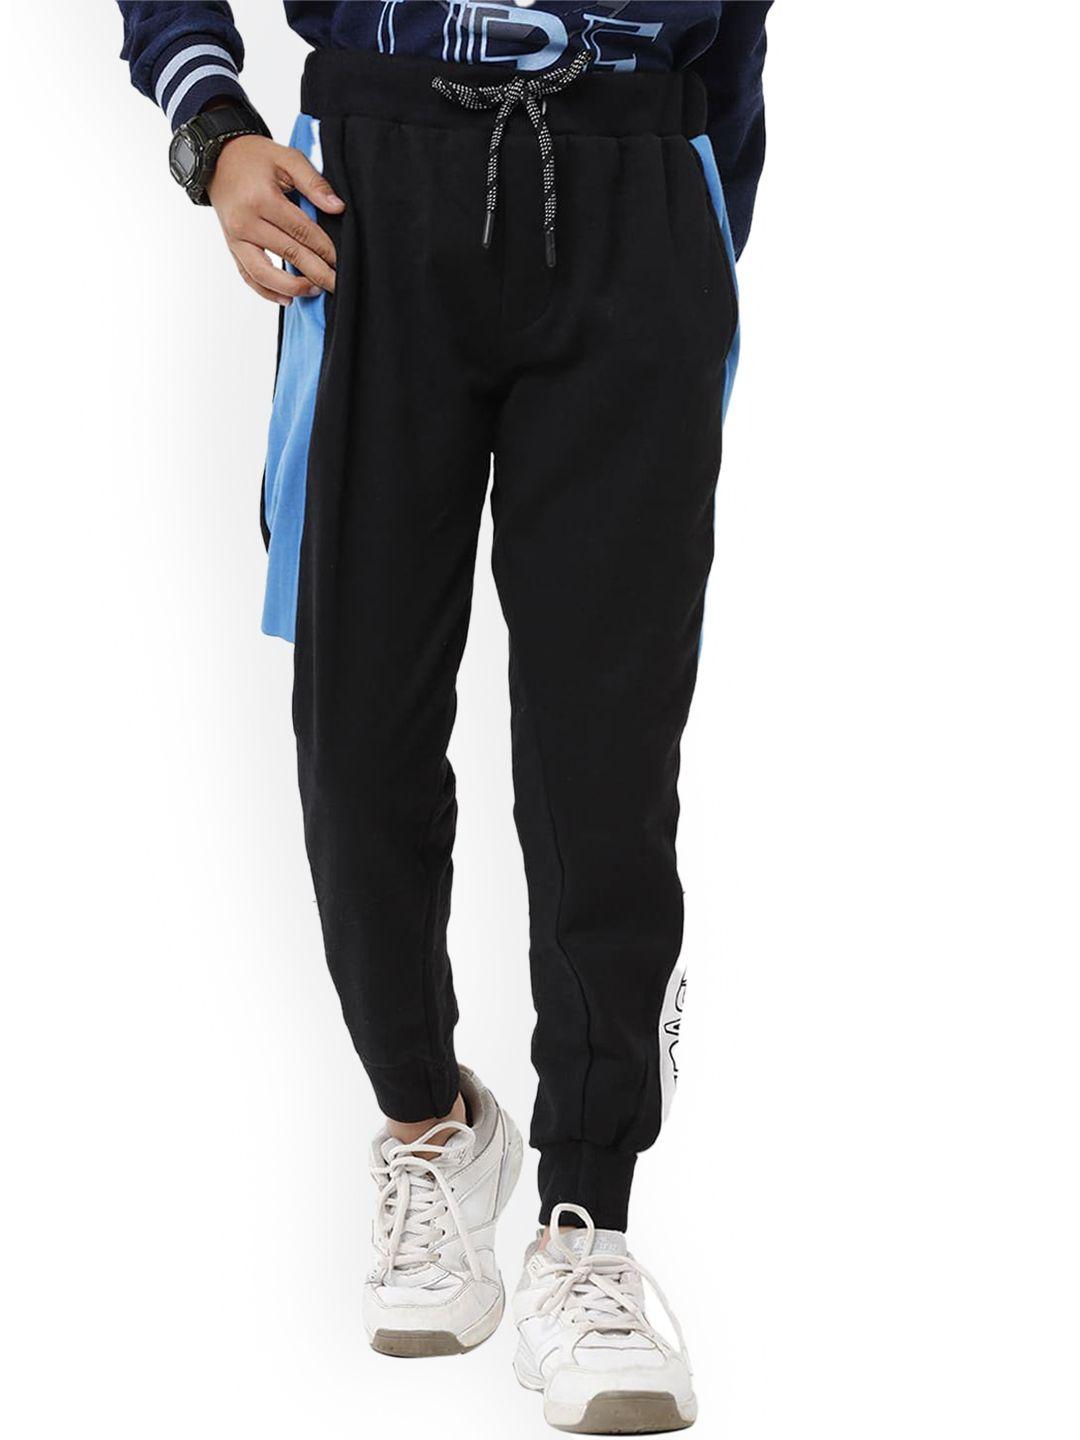 under fourteen only boys black slim fit joggers trousers